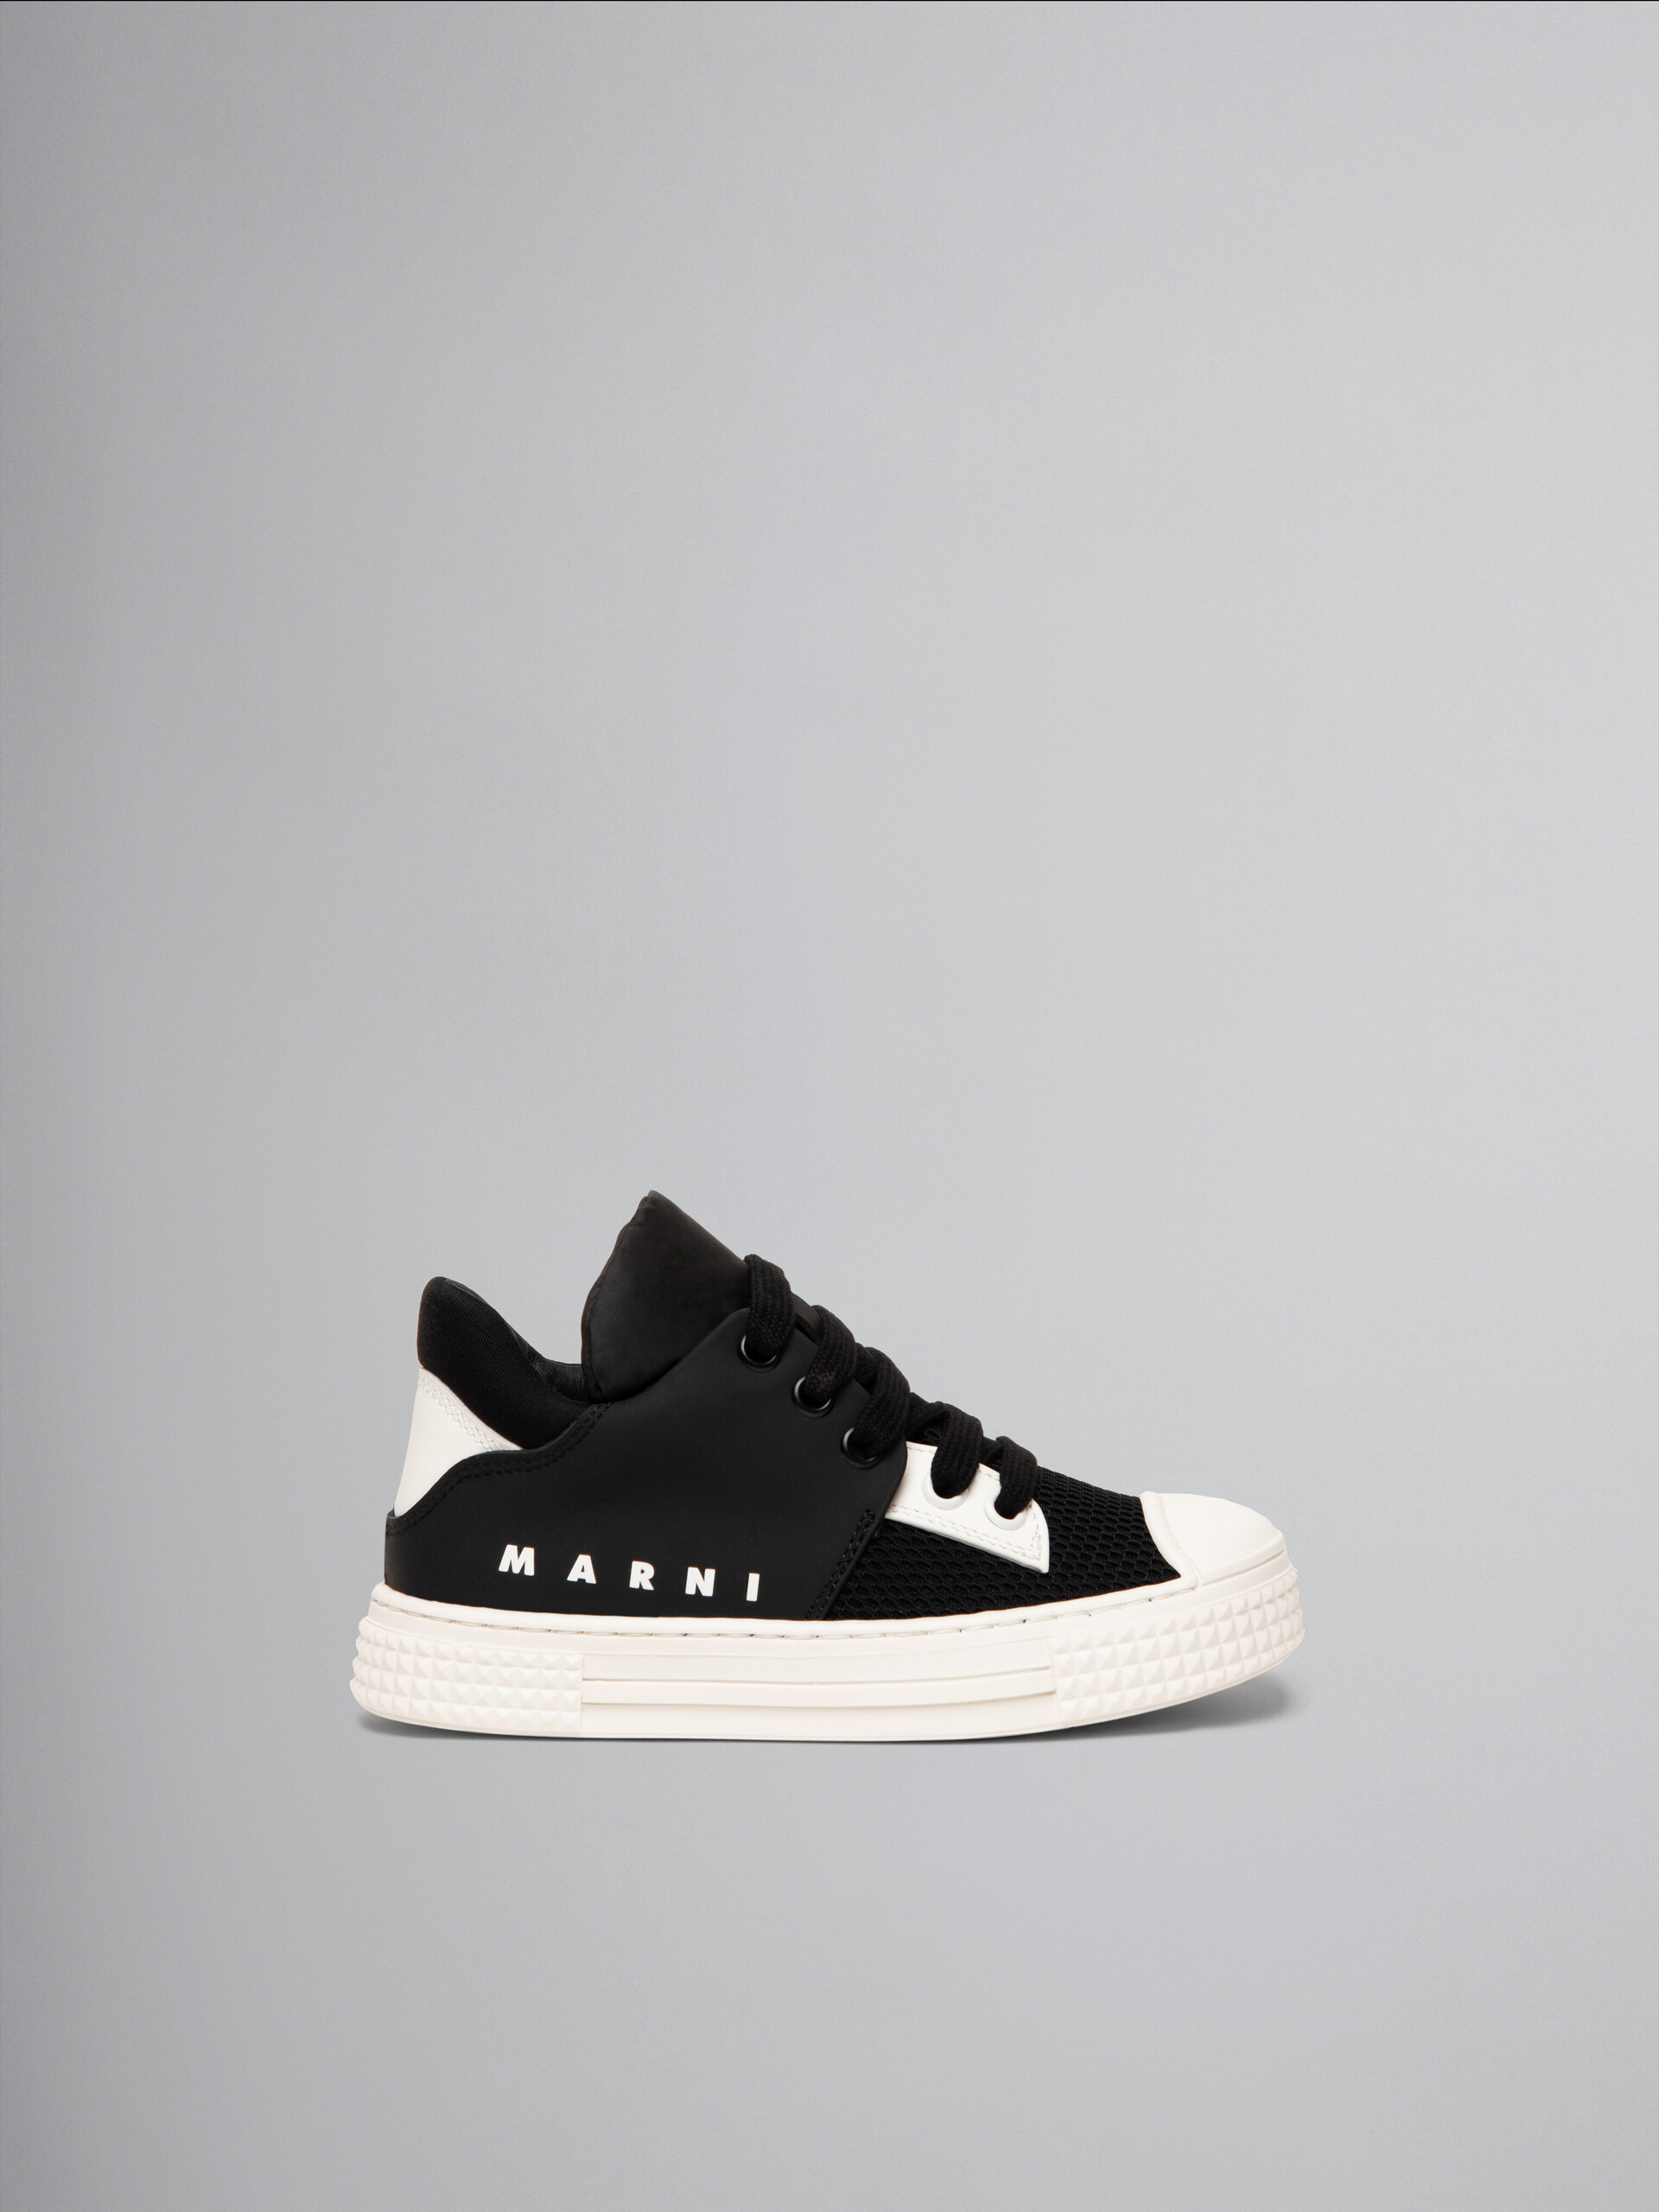 Black leather sneaker with Marni logo - Other accessories - Image 1